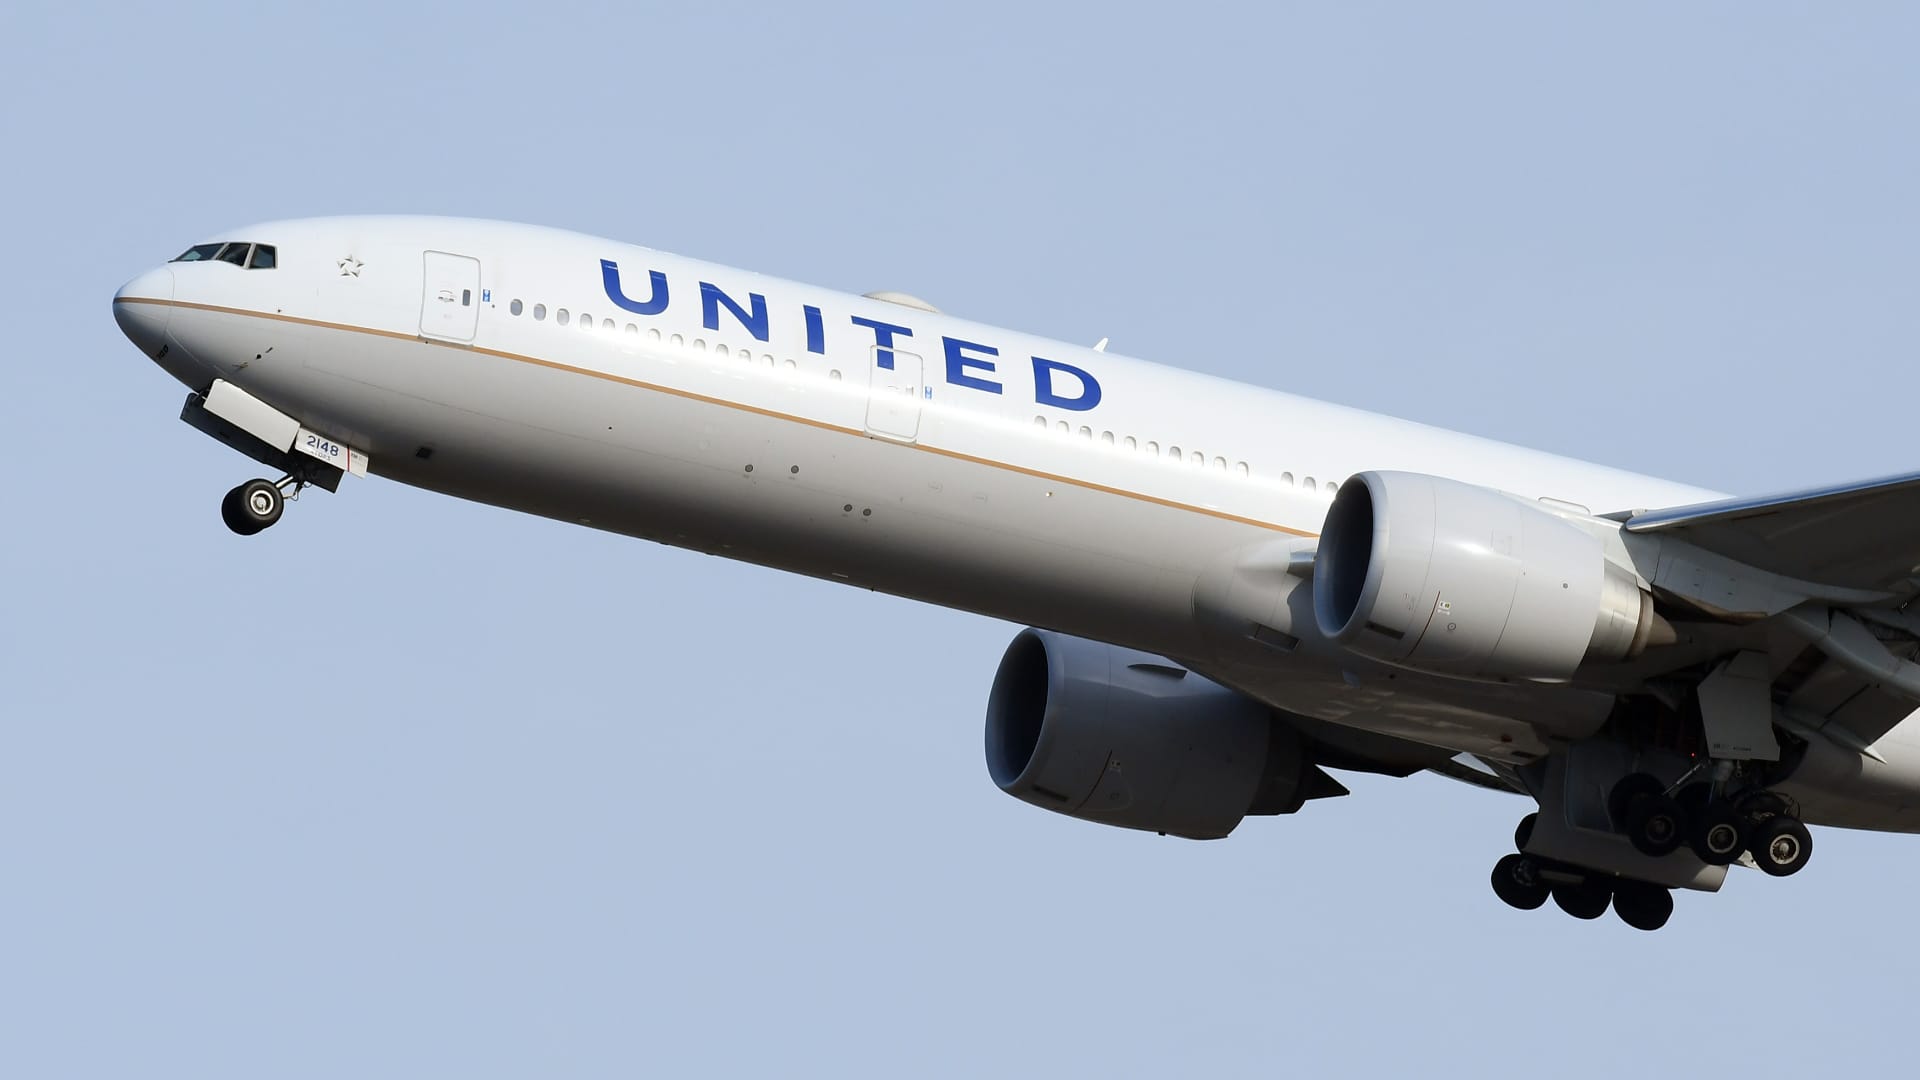 United Airlines (UAL) 1Q 22 earnings